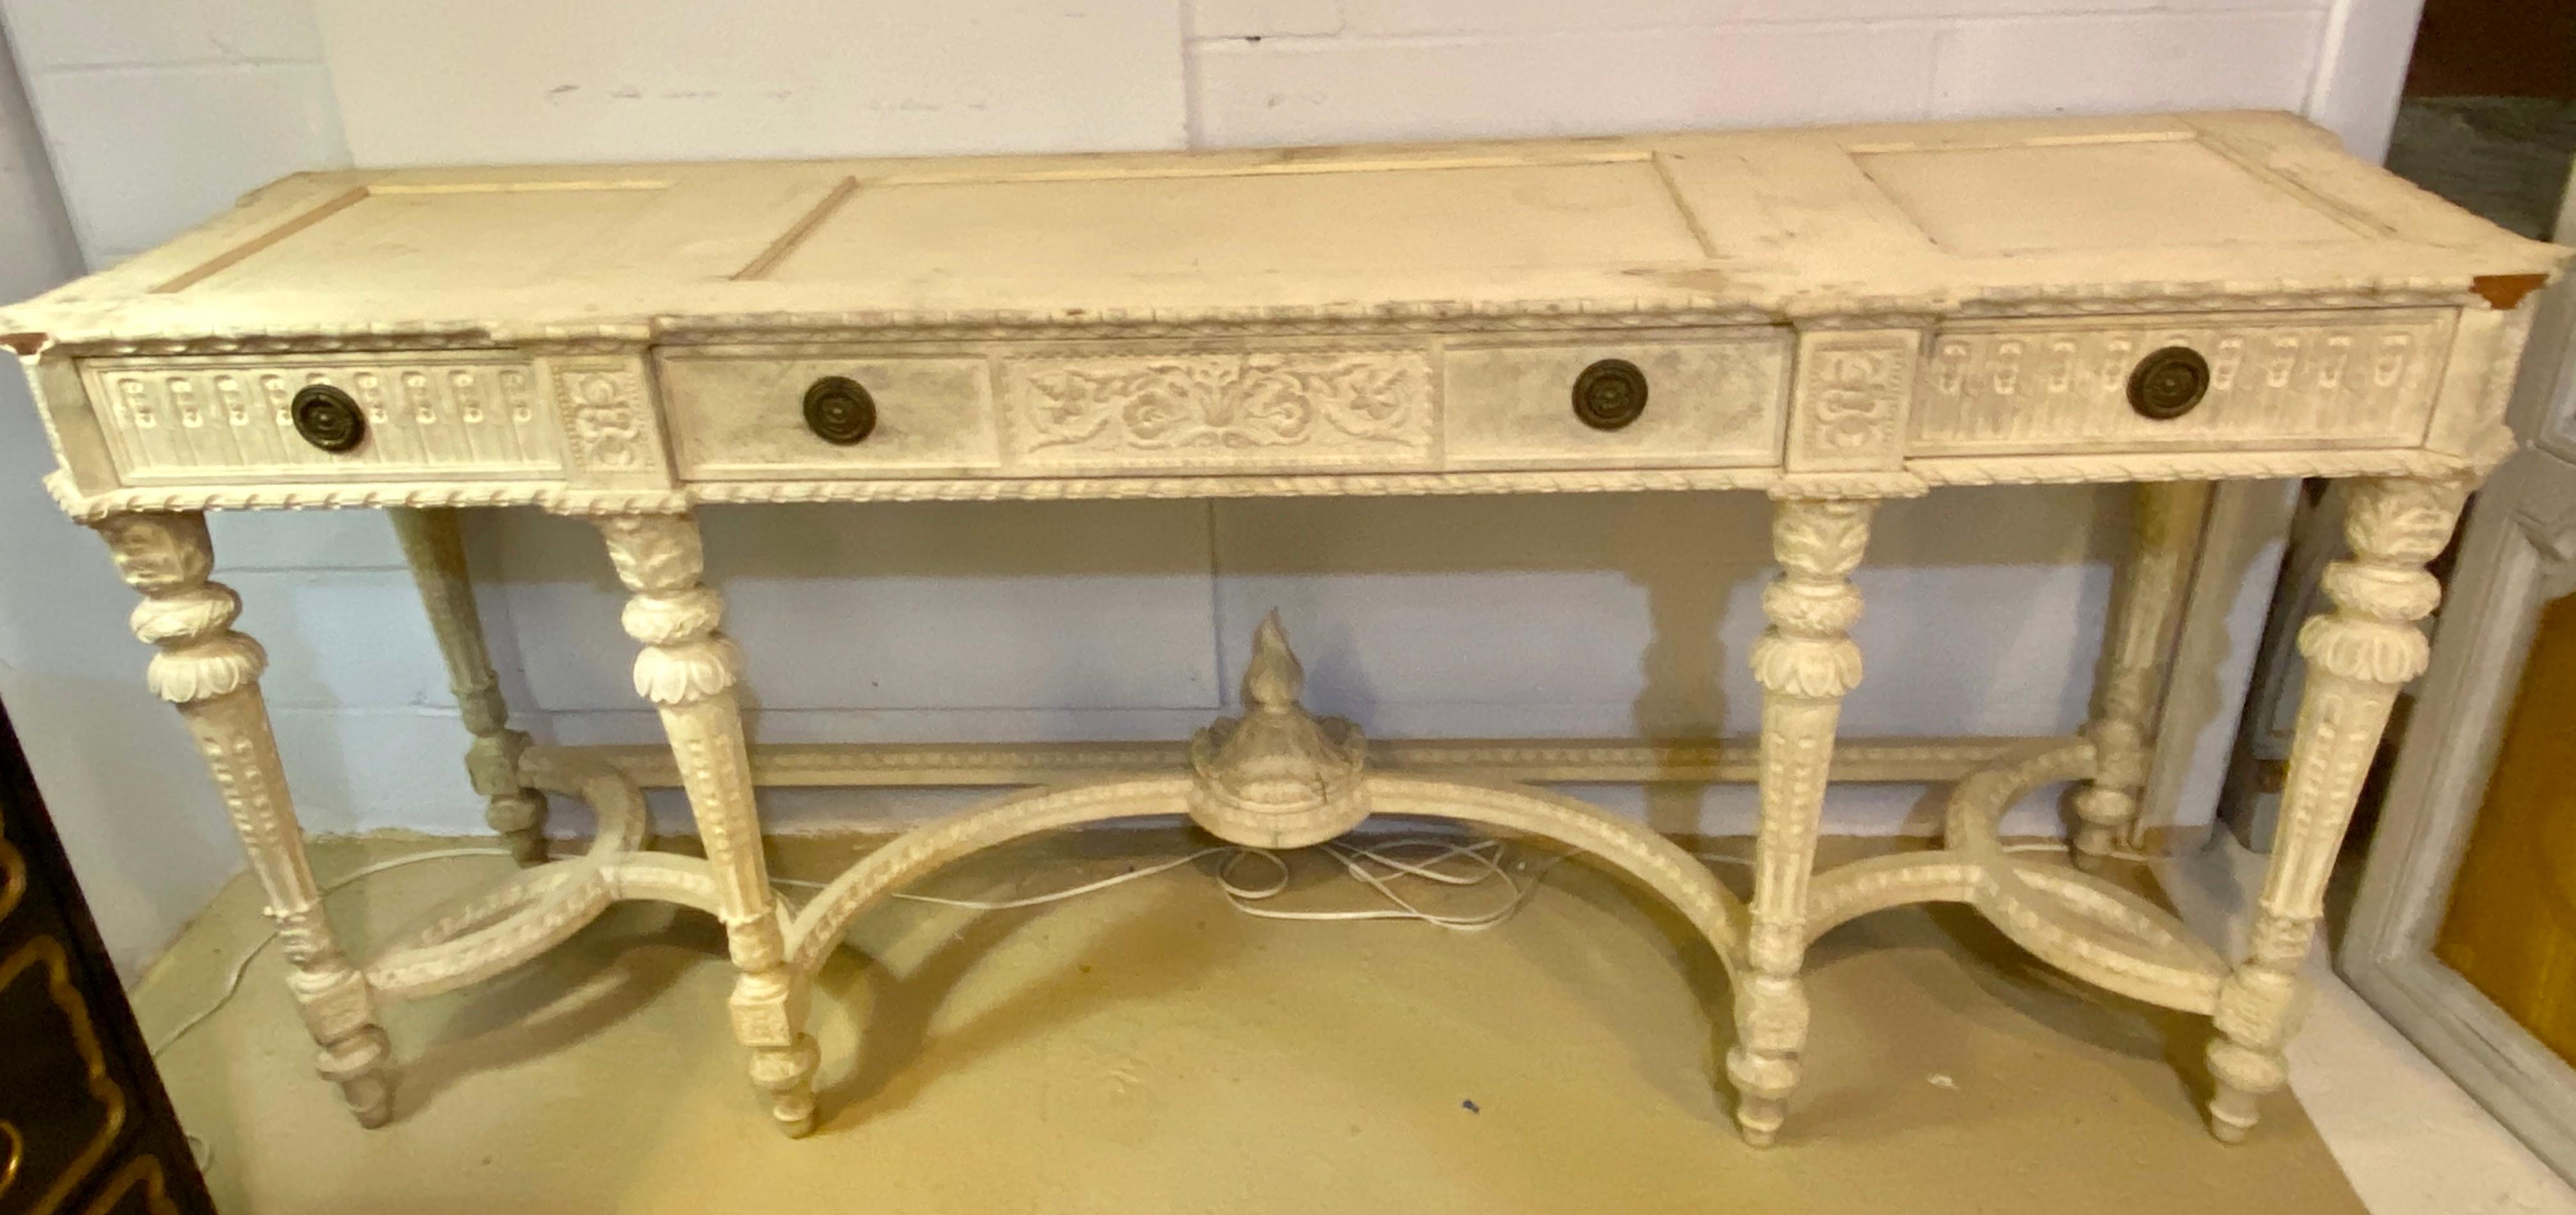 A Louis XVI style Swedish painted sideboard, console or serving table. A simply stunning 19th-early 20th century French console table having a rouge, gray and white 1.75 inch thick marble top. The top supported by a set of six finely carved gray /